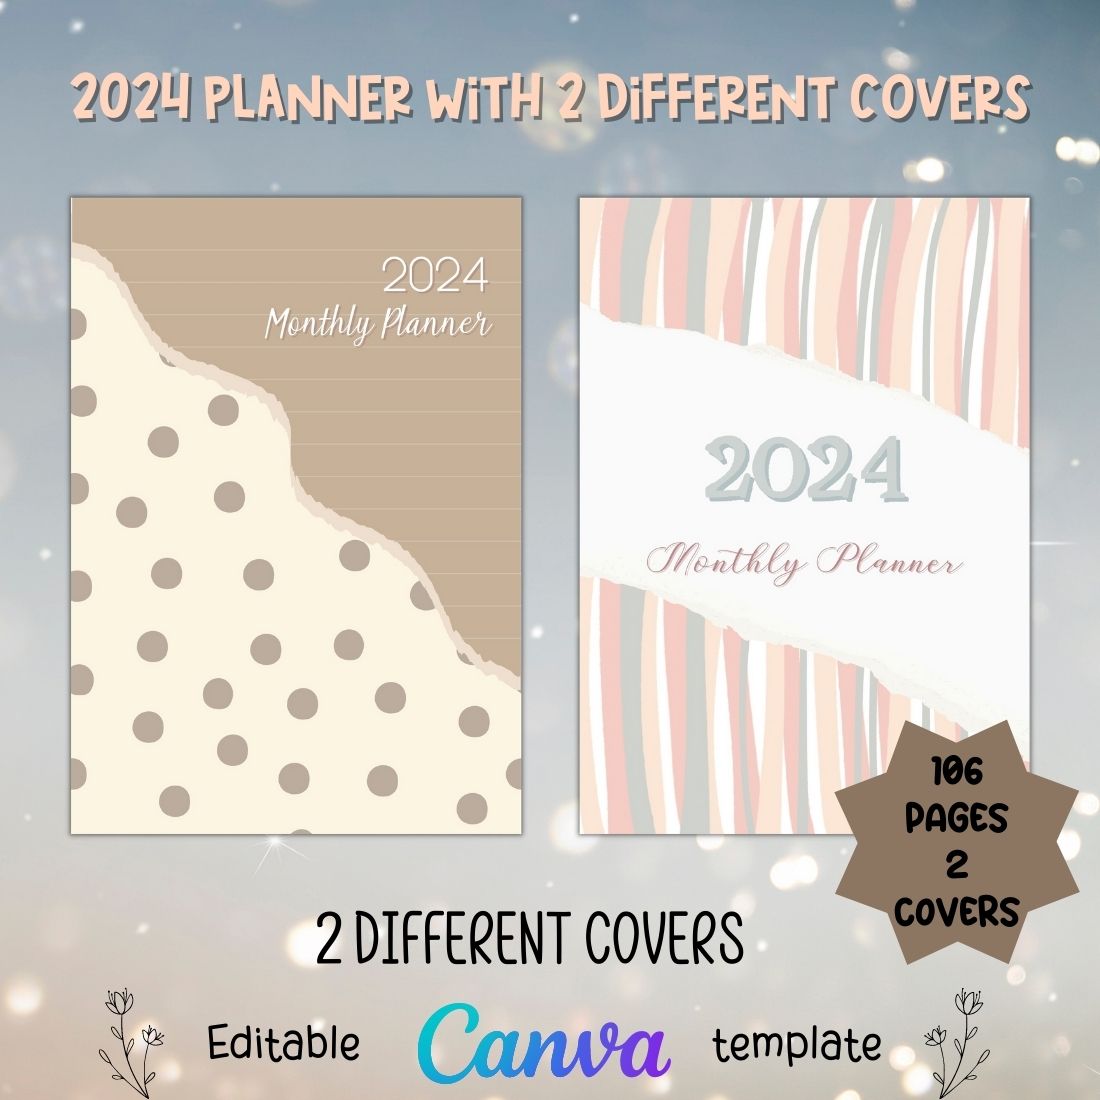 CANVA 2023 Planner Templates preview image.